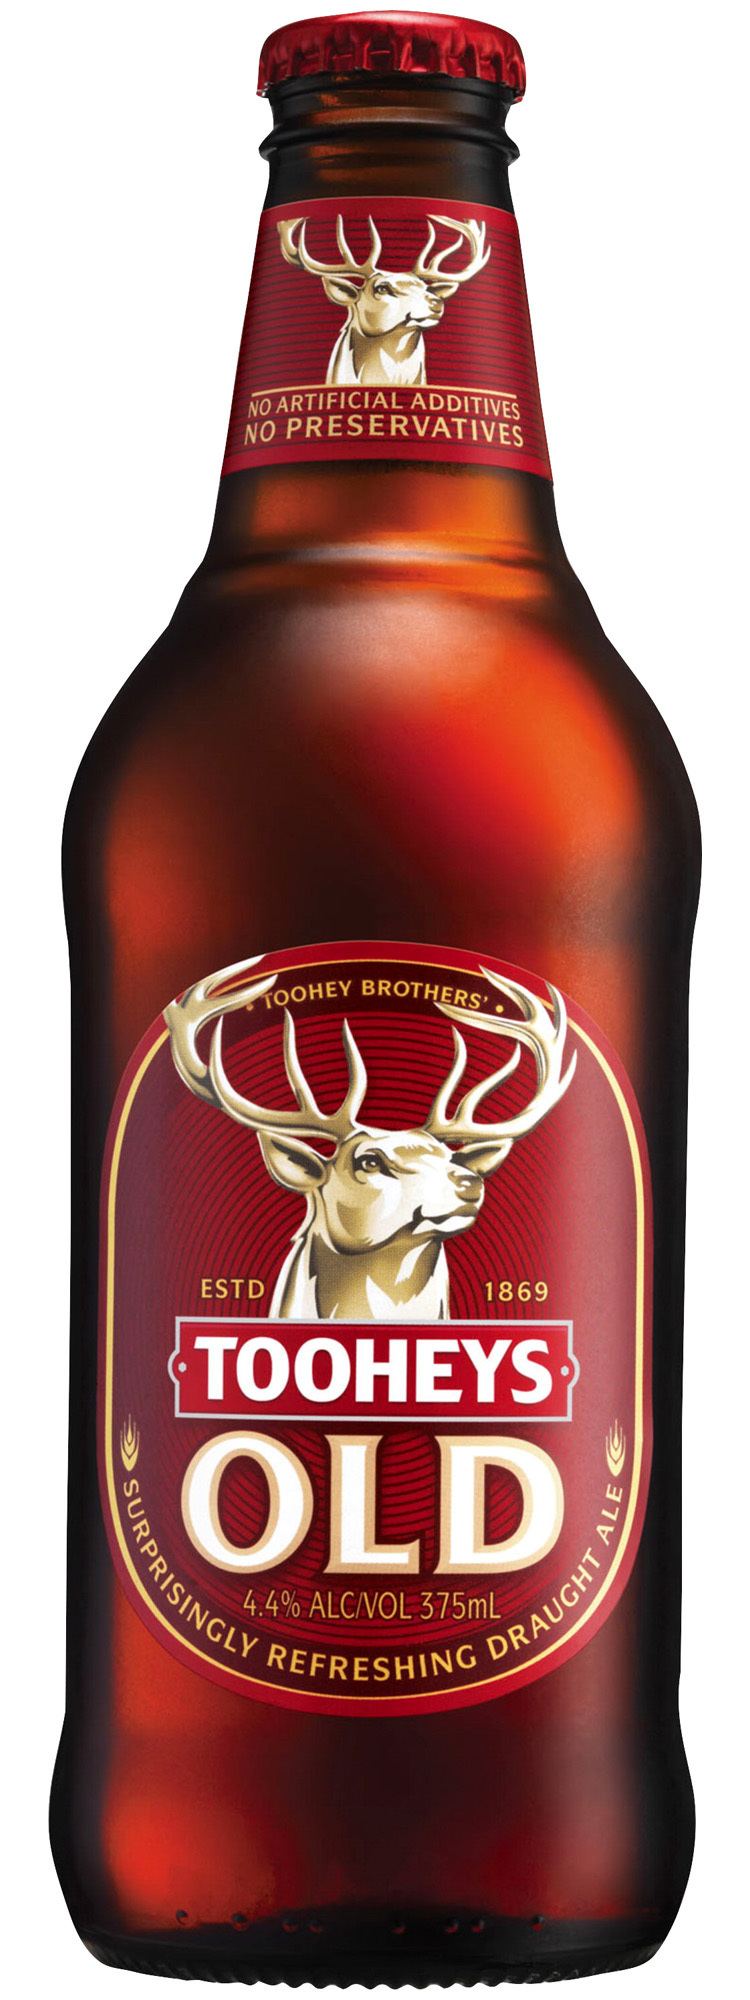 Tooheys Old Tooheys Old this goes out to a fellow designer in Calgary cheers